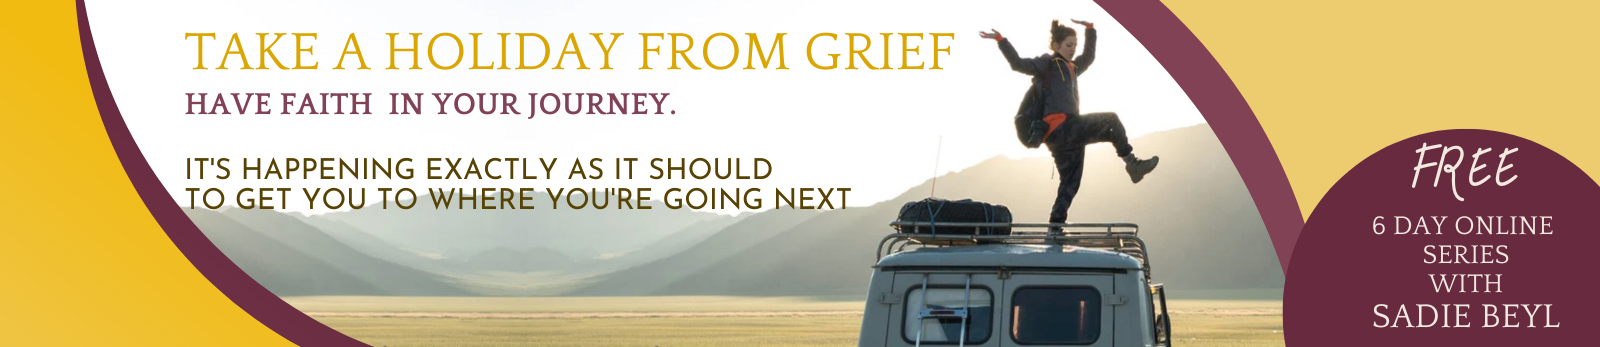 Take a Holiday From Grief: 6 Day Online Series with Sadie Beyl